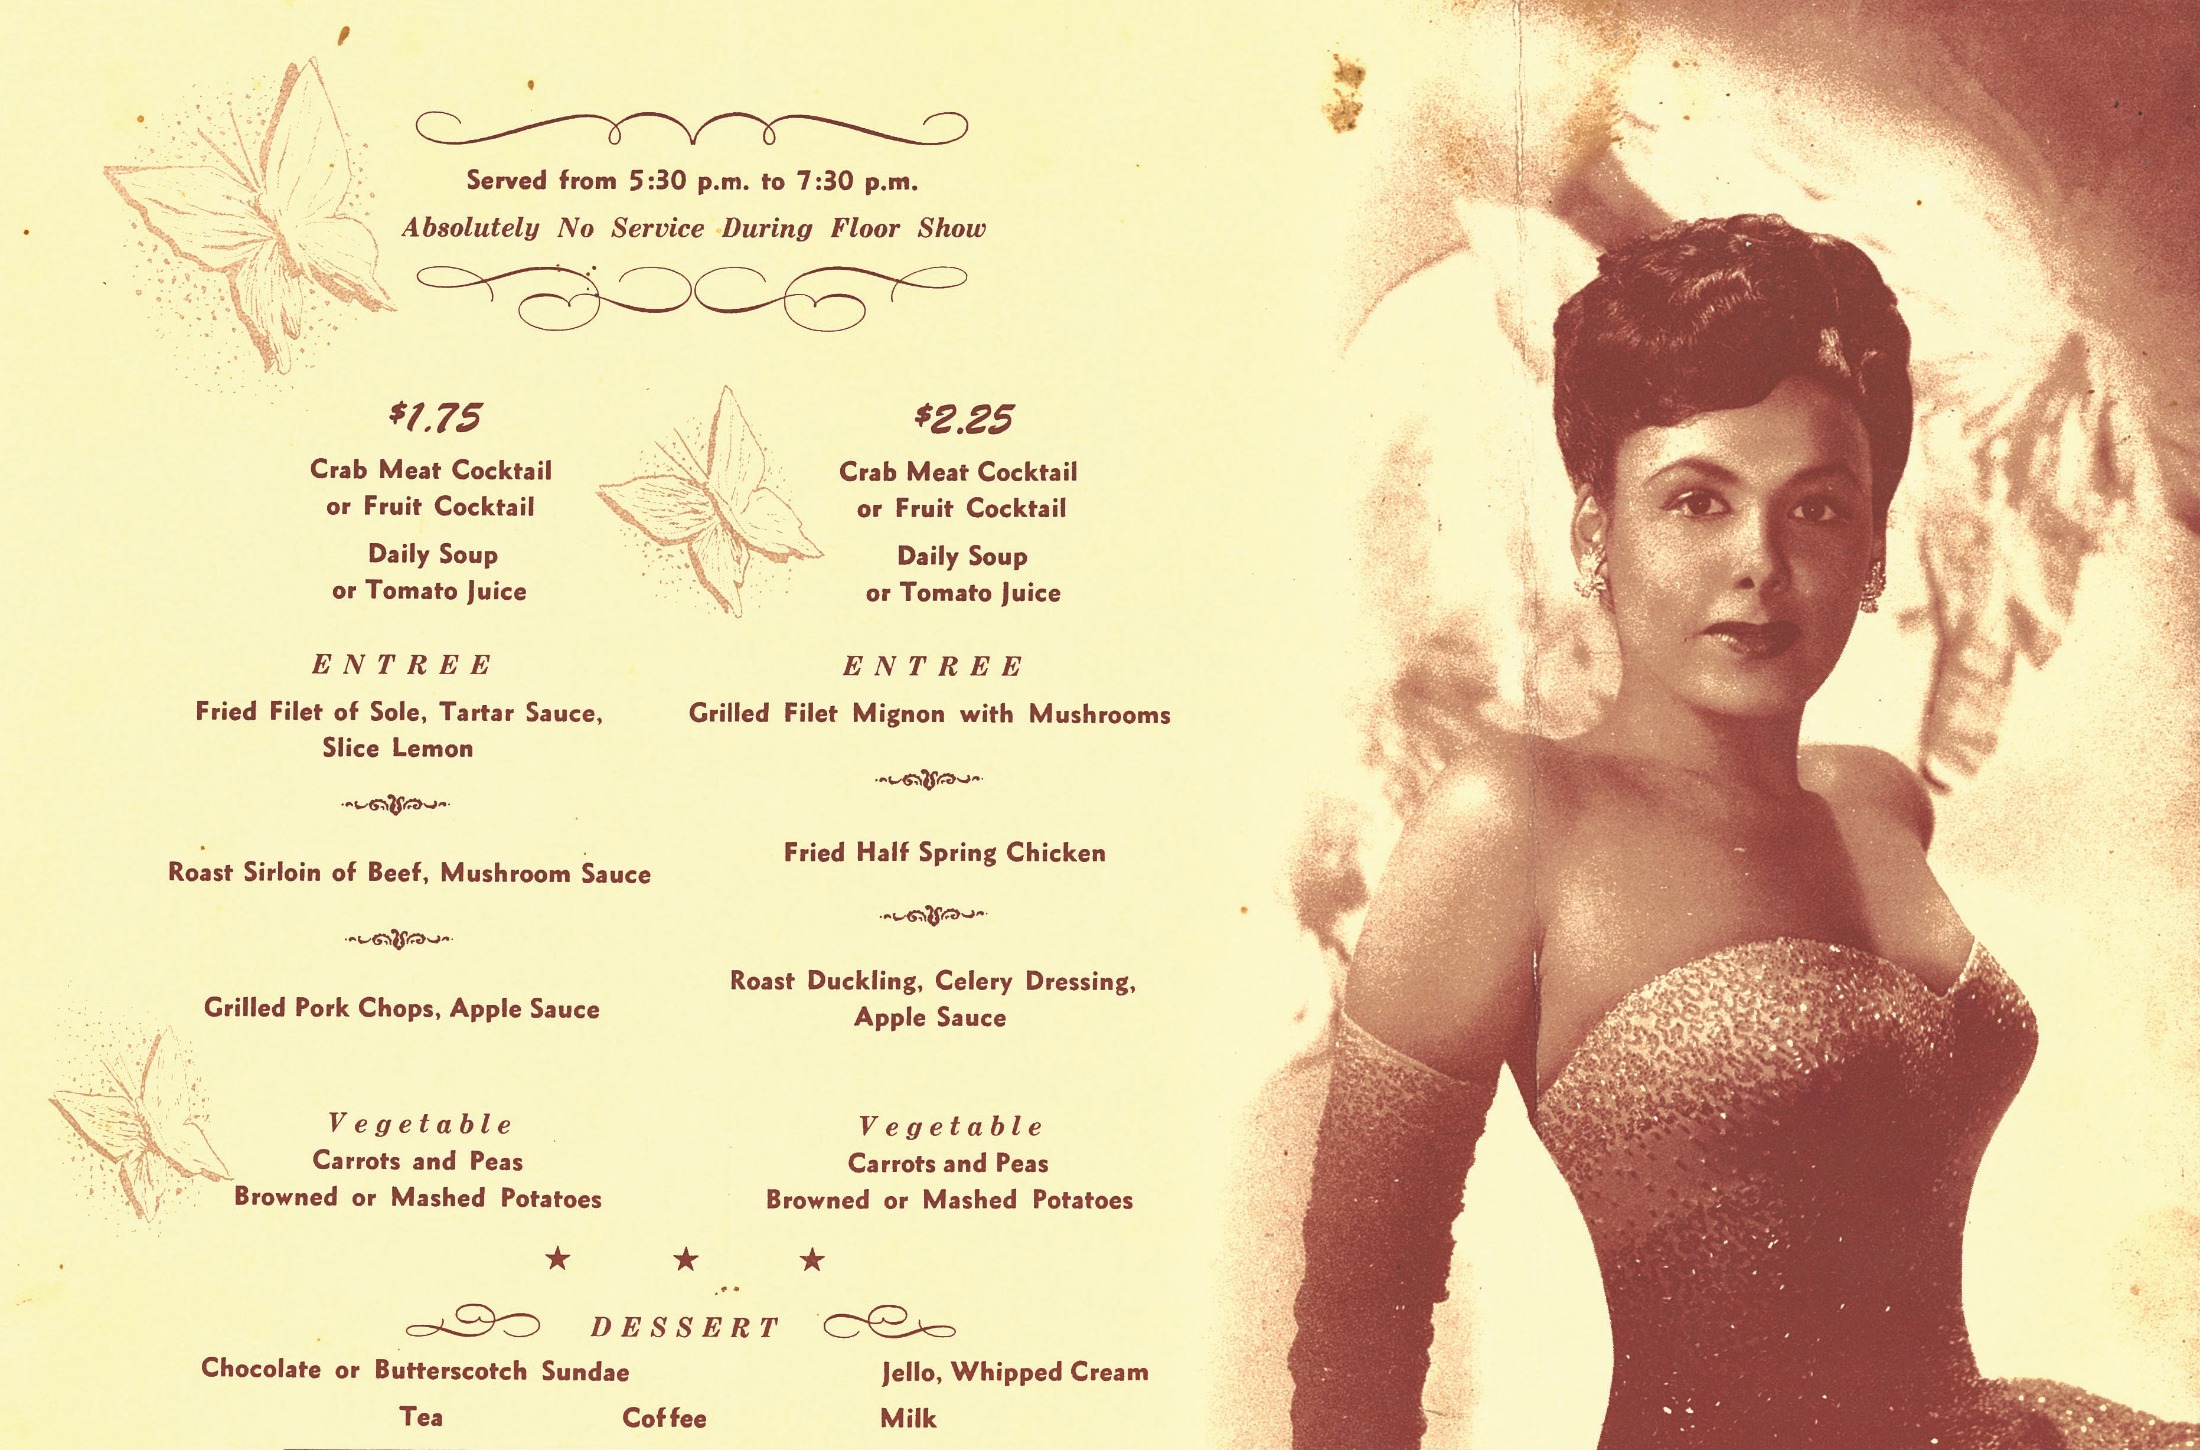 The Cave menu featuring singer Lena Horne. Photo courtesy of Neptoon Records Archives.